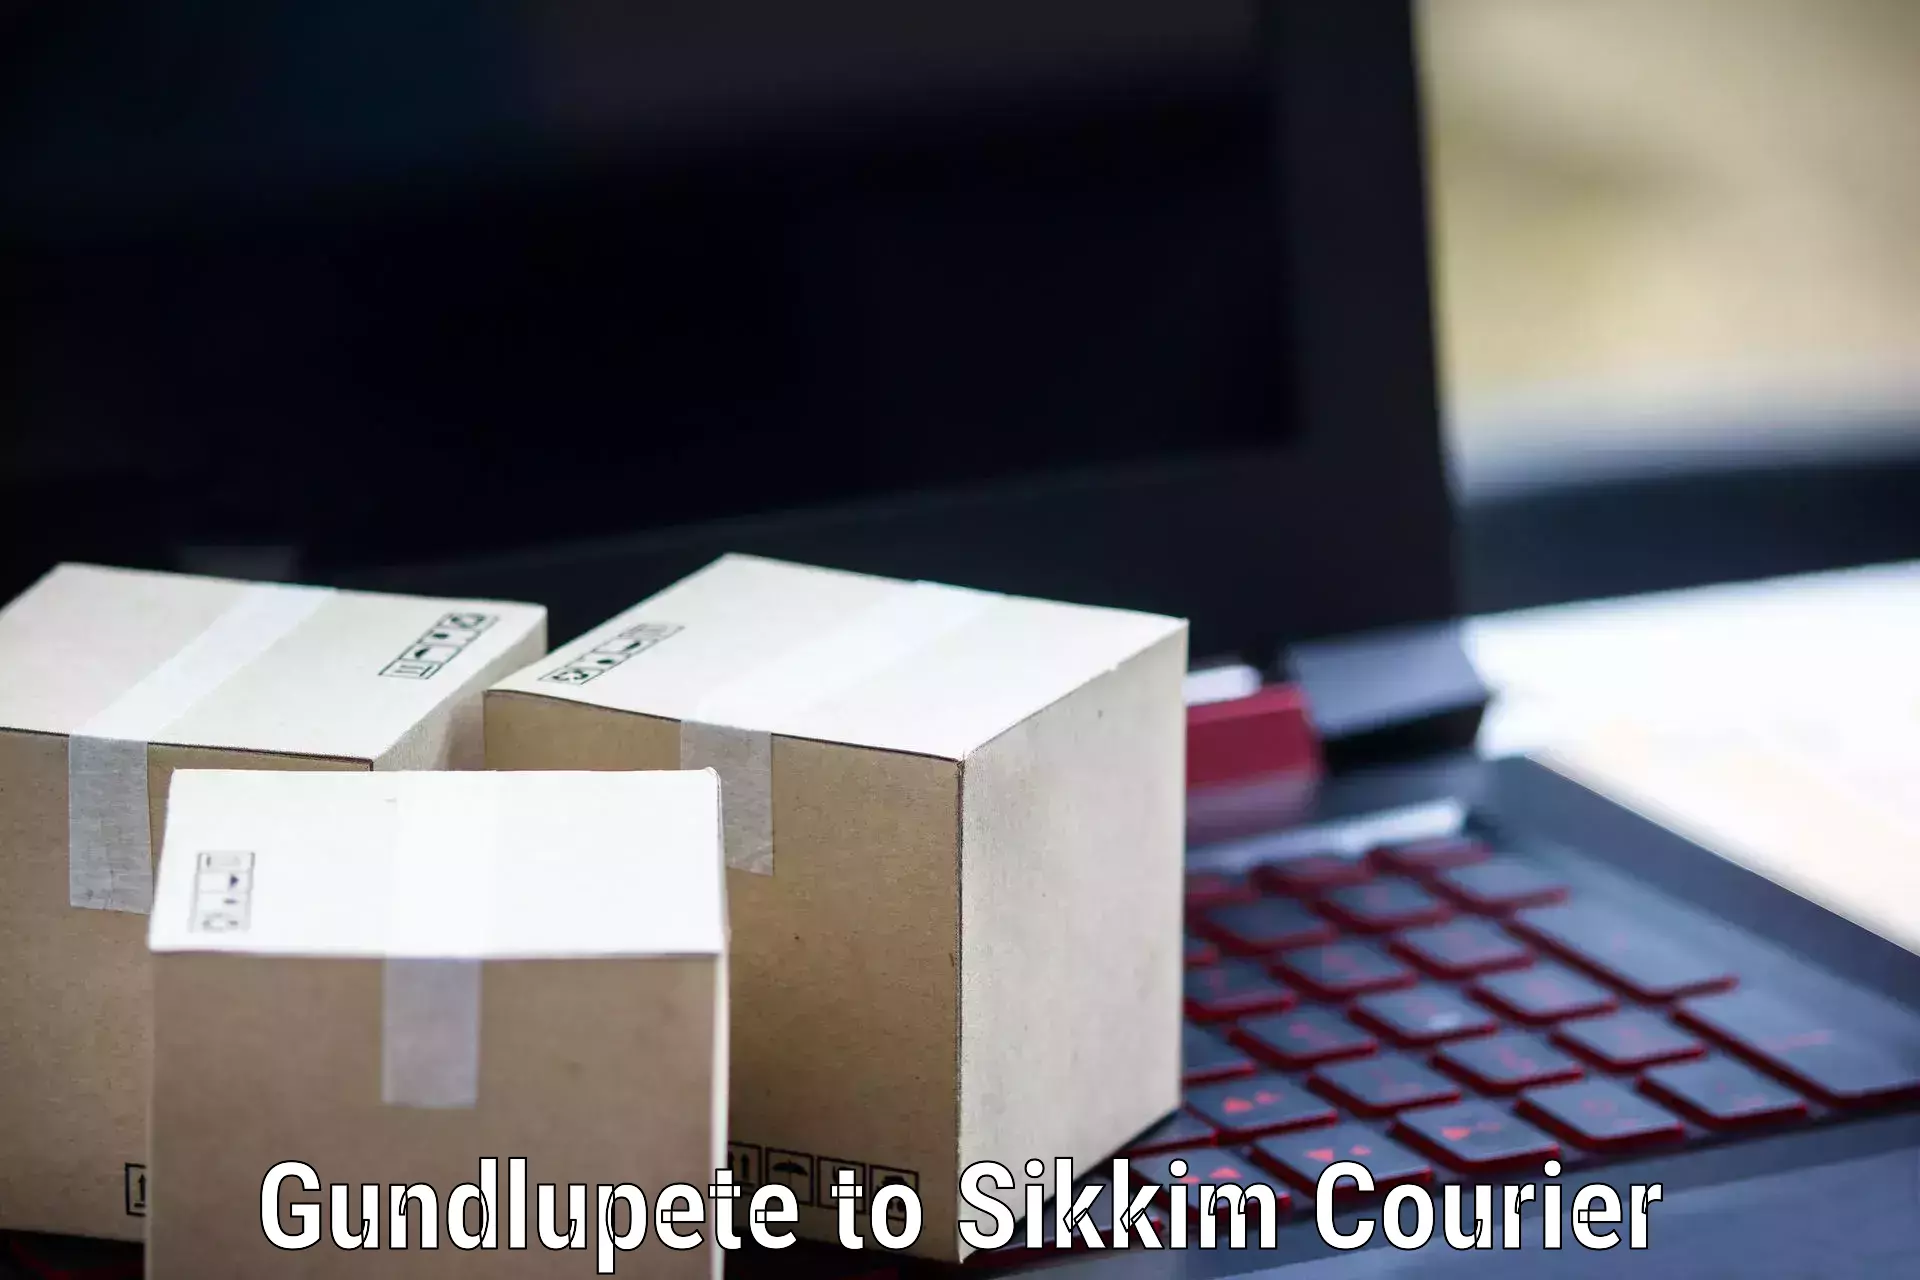 Modern courier technology Gundlupete to Pelling